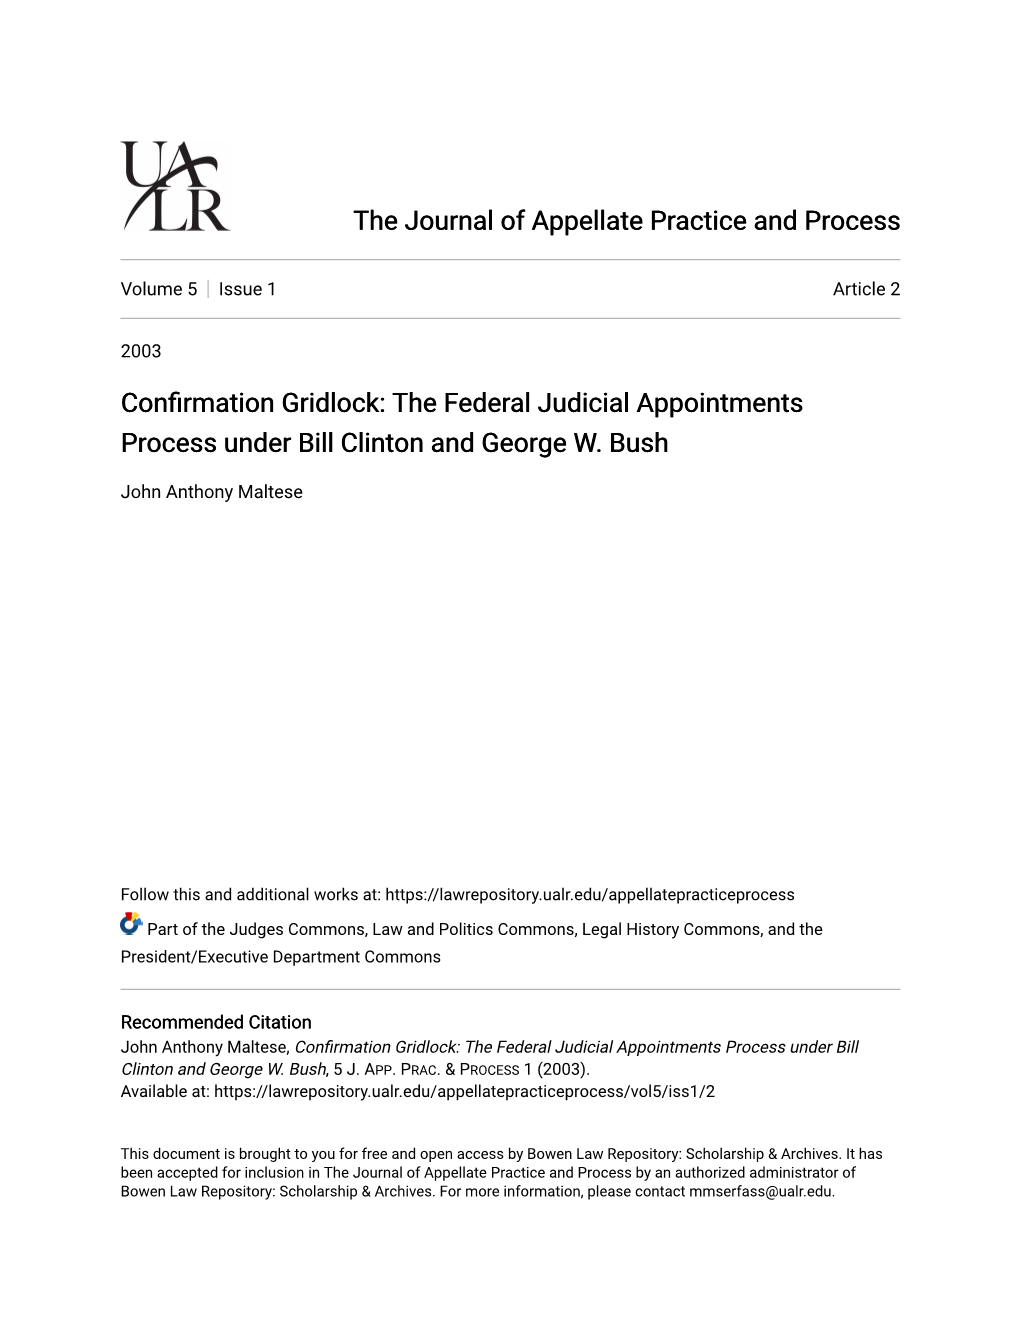 The Federal Judicial Appointments Process Under Bill Clinton and George W